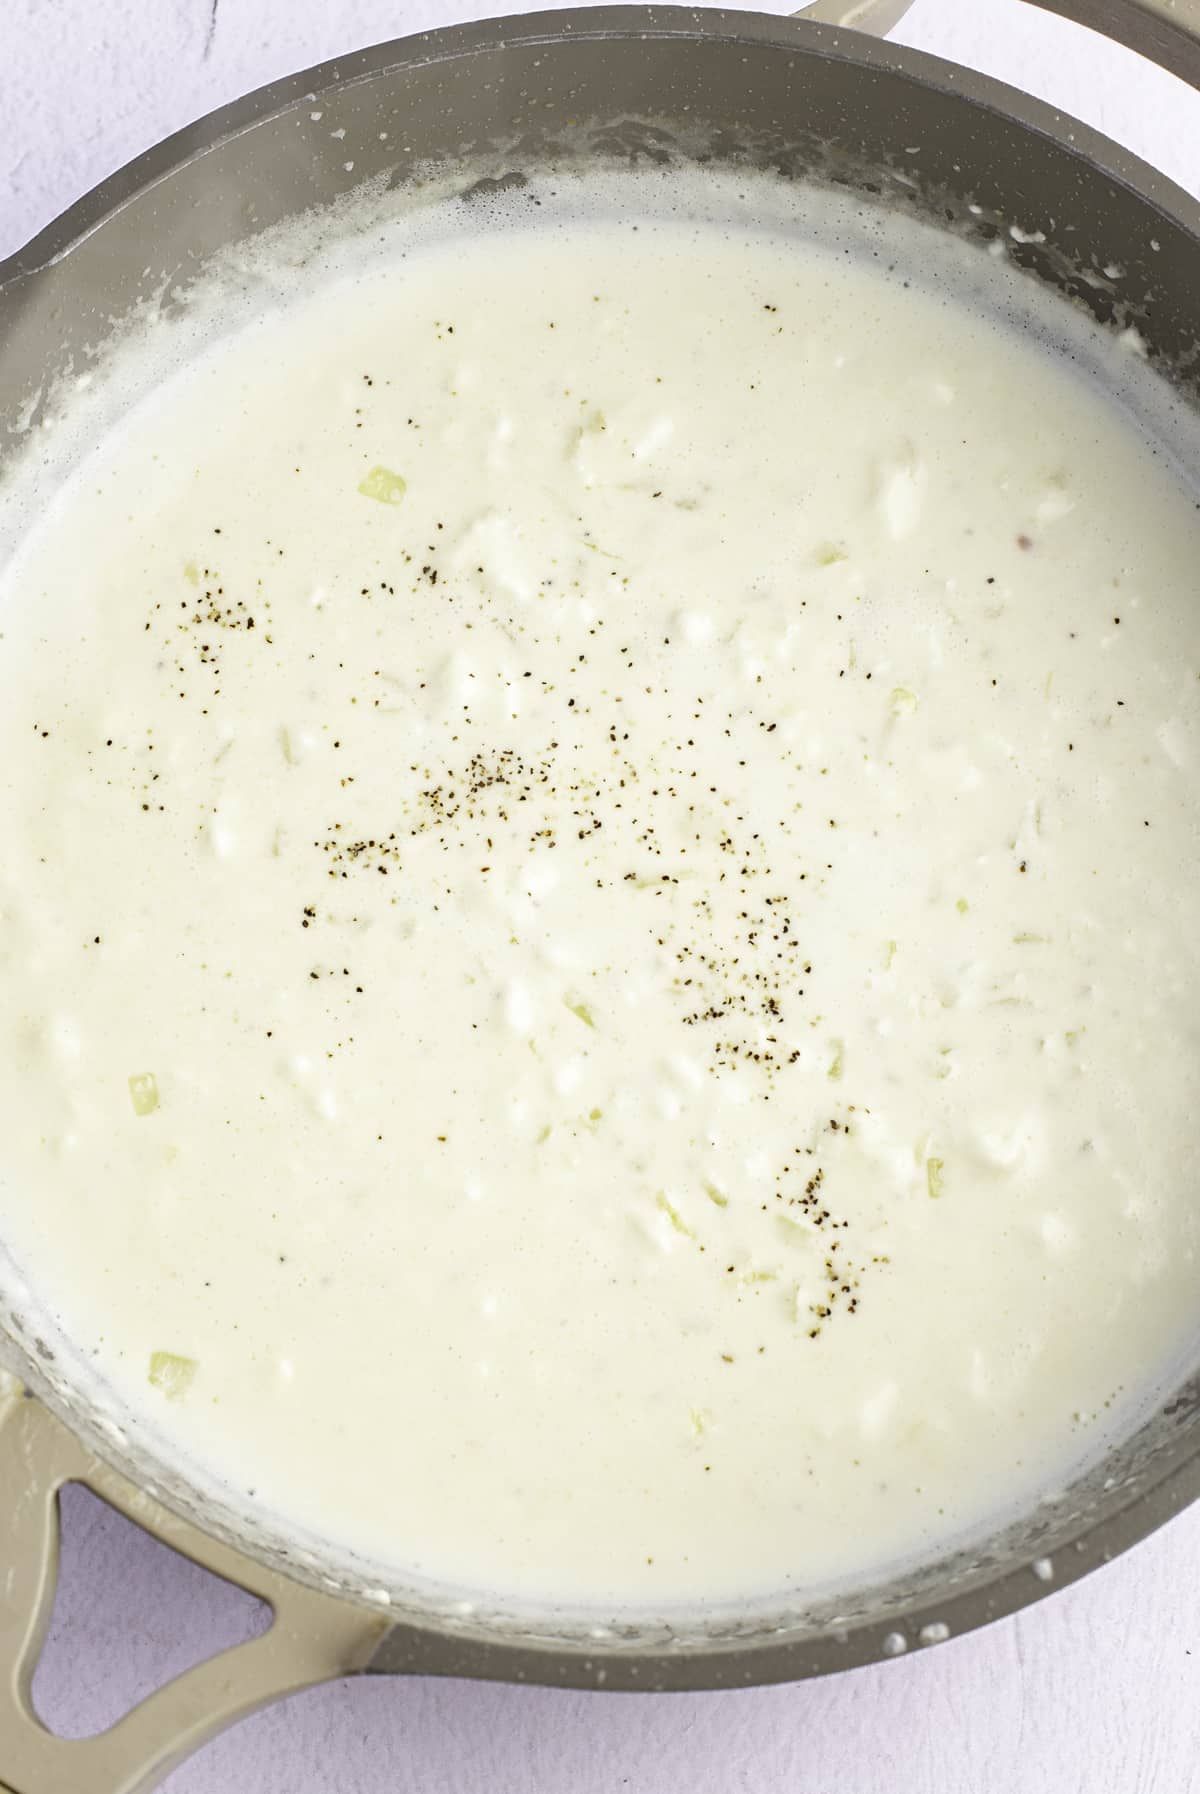 Cream added to the skillet.